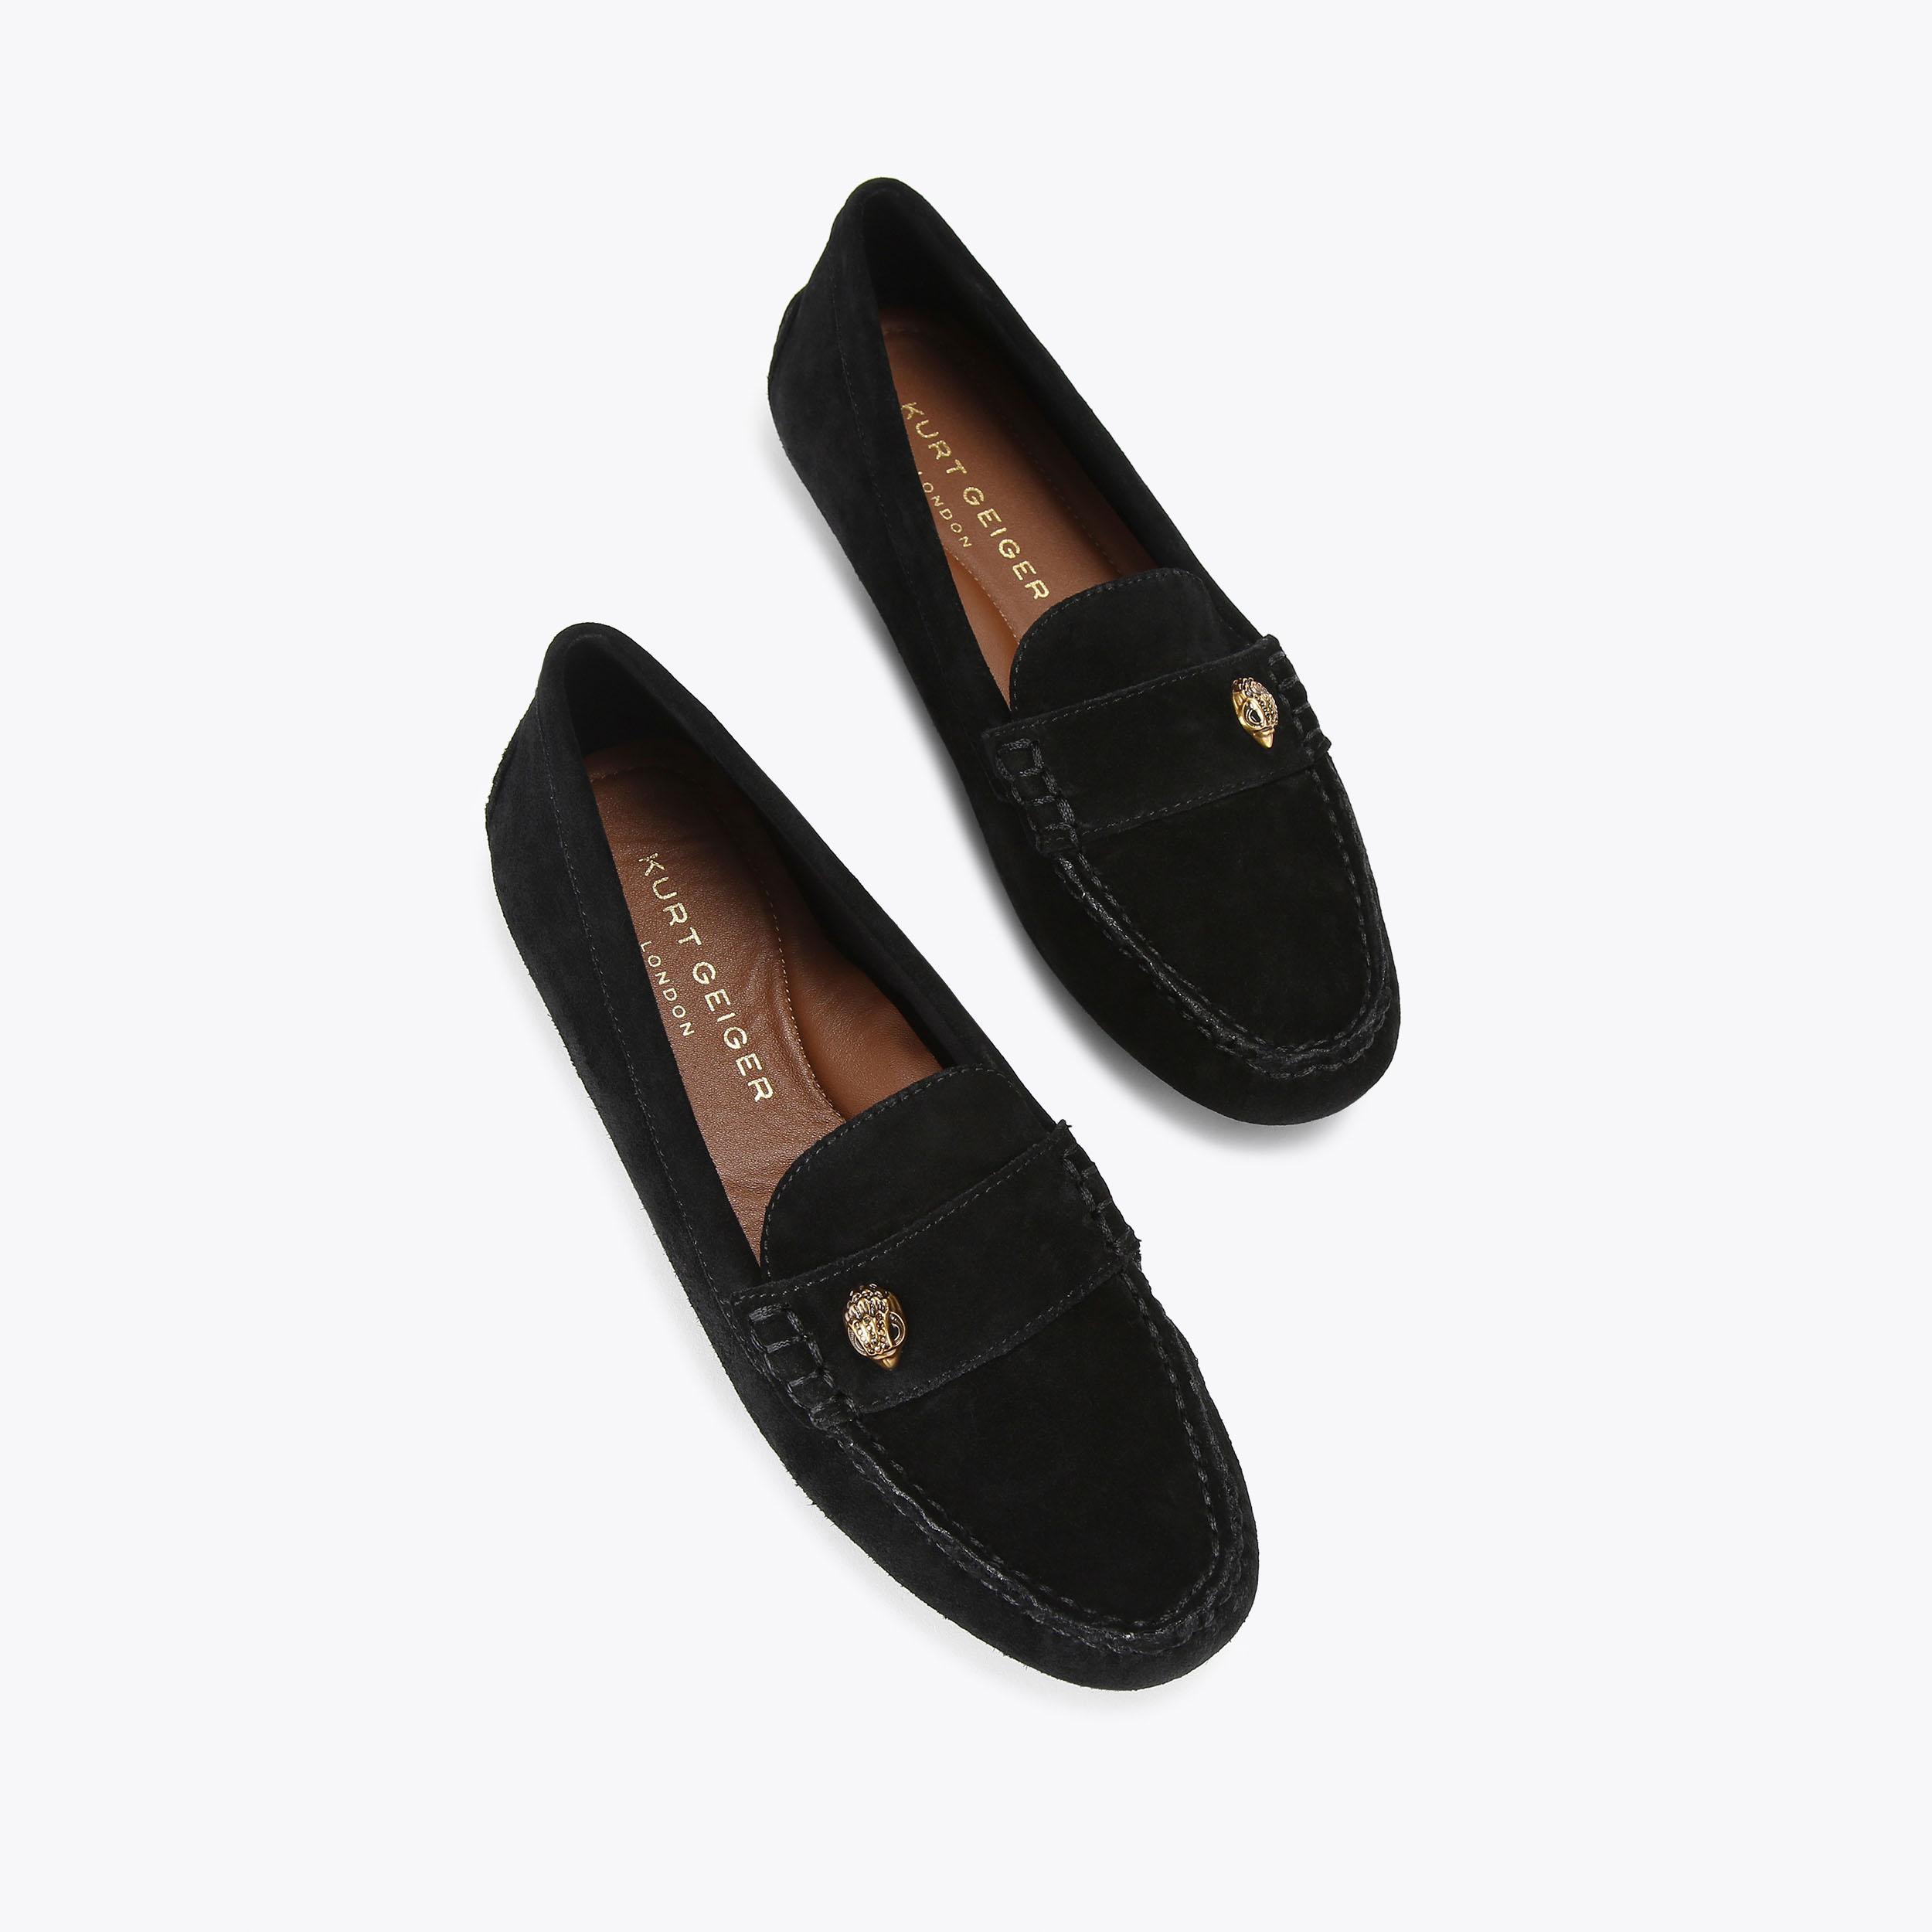 EAGLE DRIVER Black Suede Loafers by KURT GEIGER LONDON